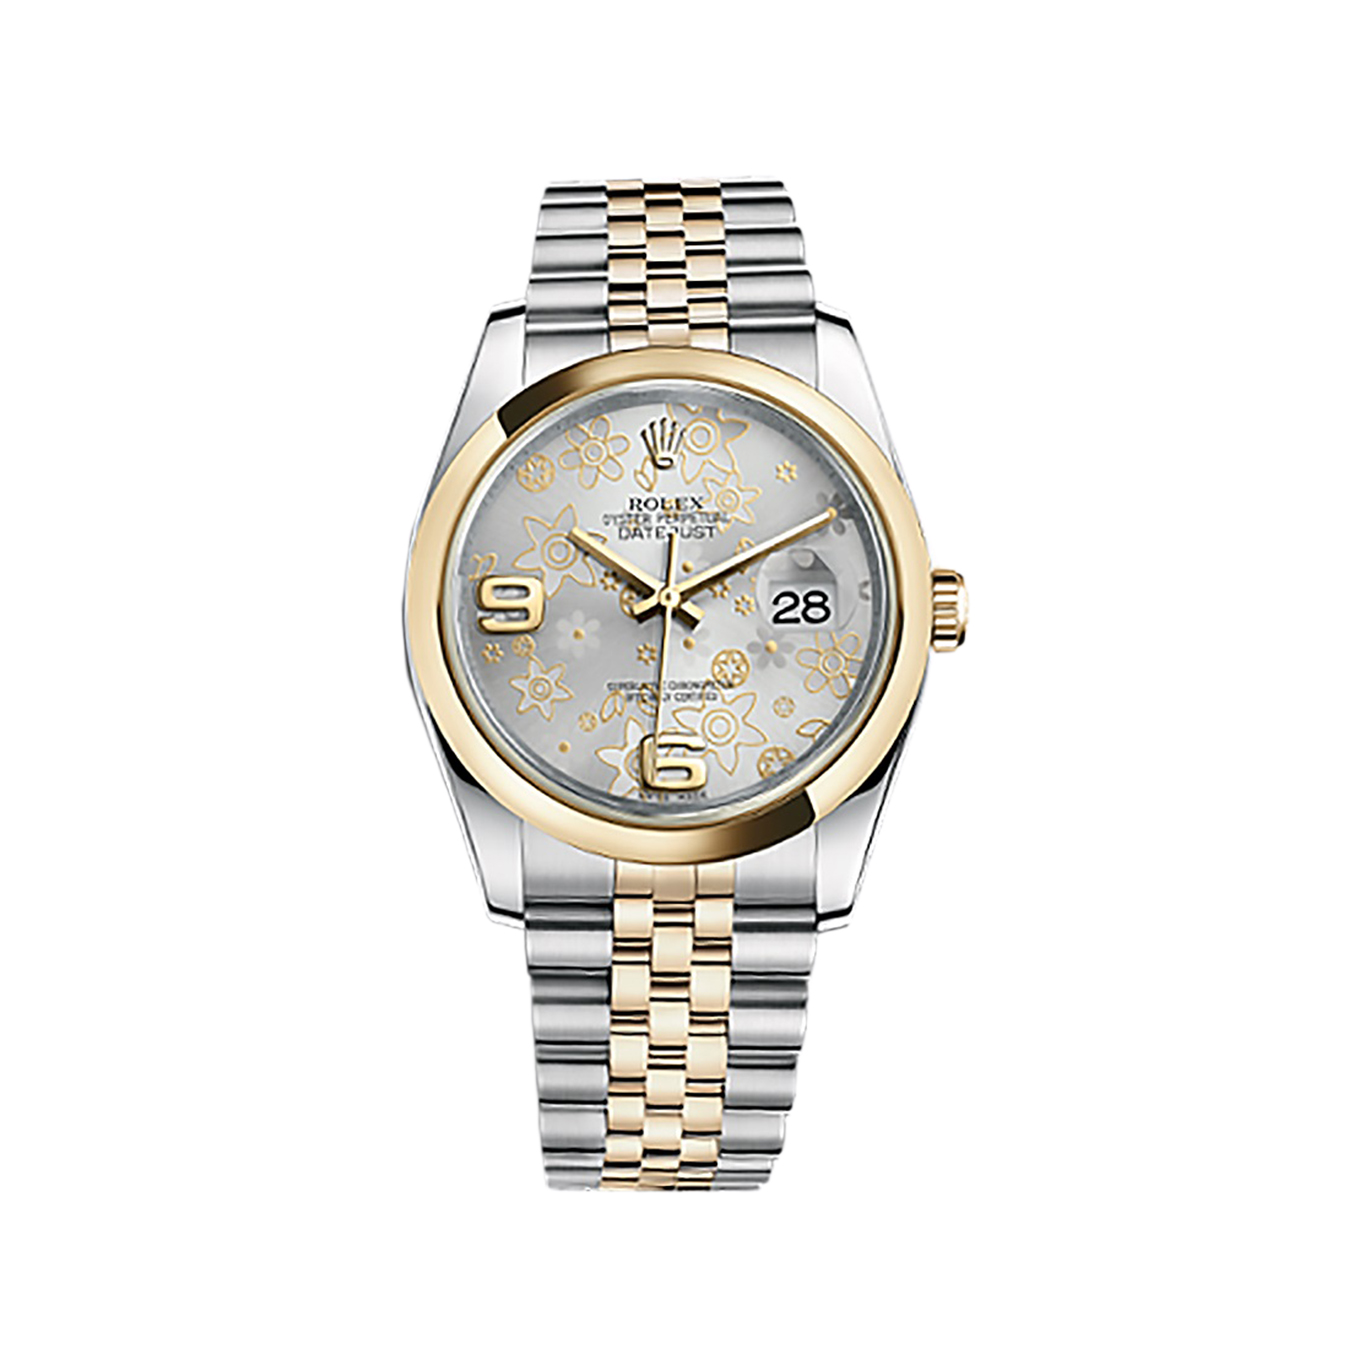 Datejust 36 116203 Gold & Stainless Steel Watch (Silver Floral Motif)